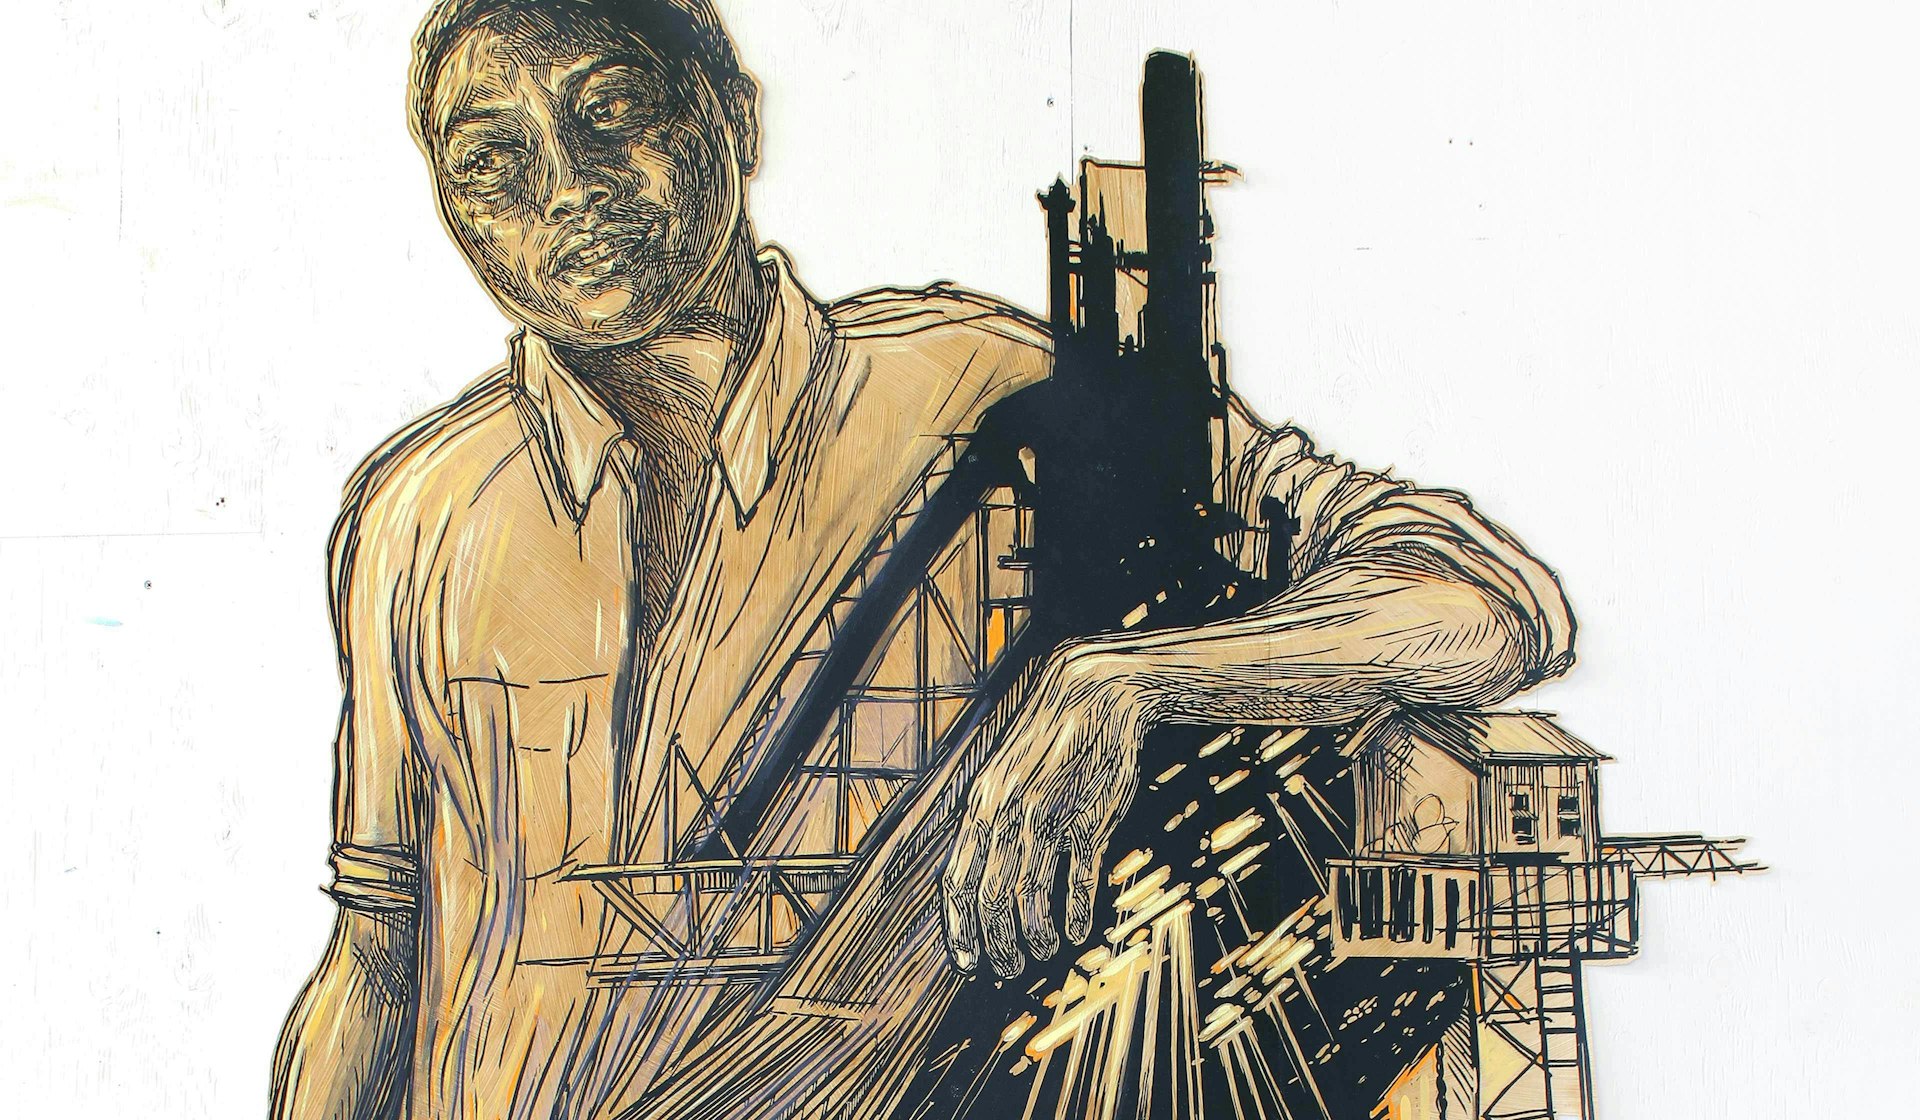 Talking change with Swoon, whose art helps us see beyond the damage man creates